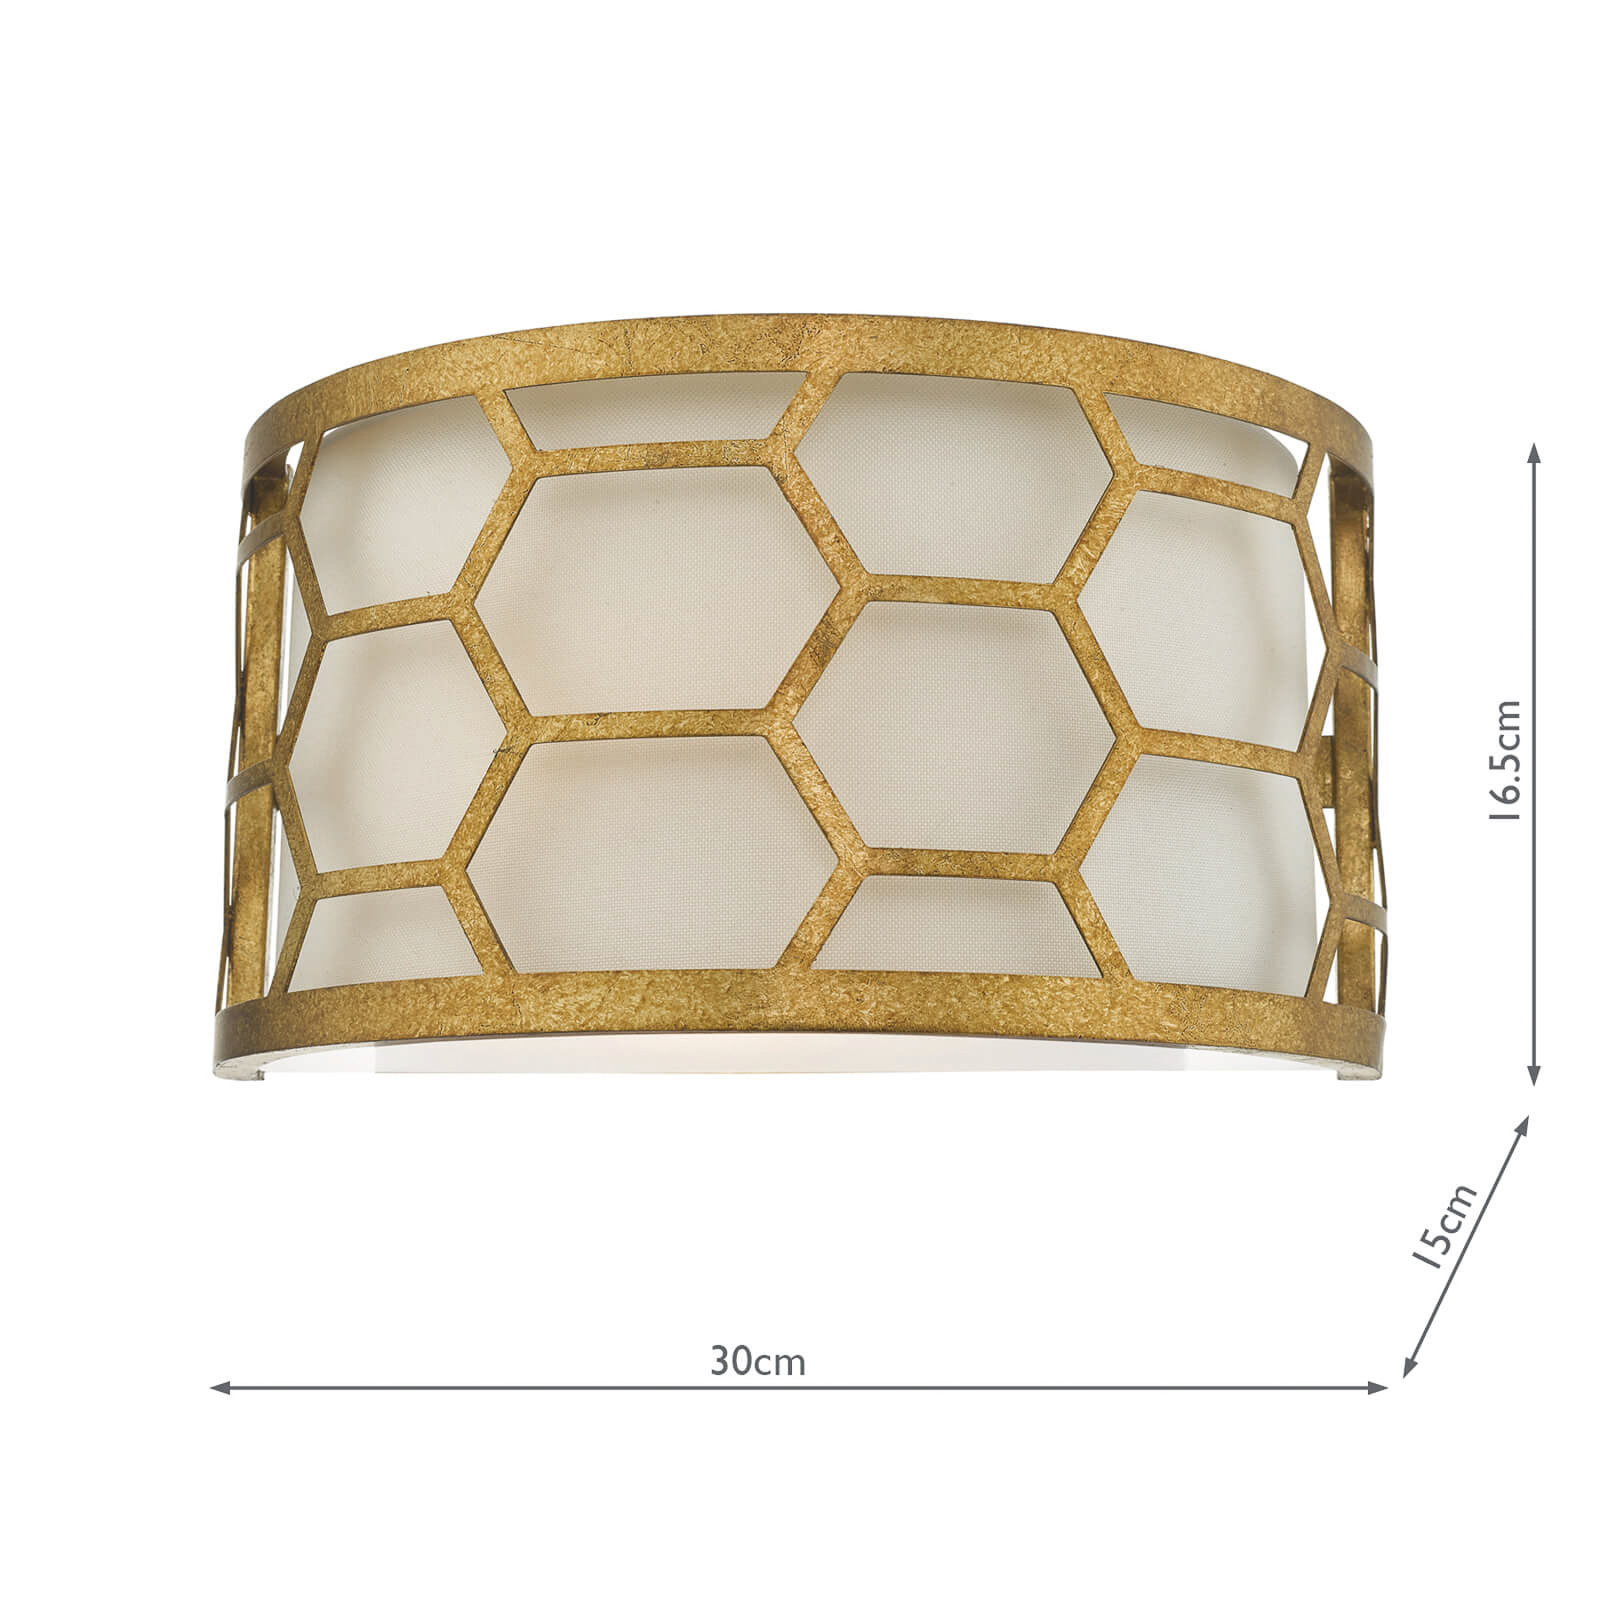 Epstein wall light in gold and ivory